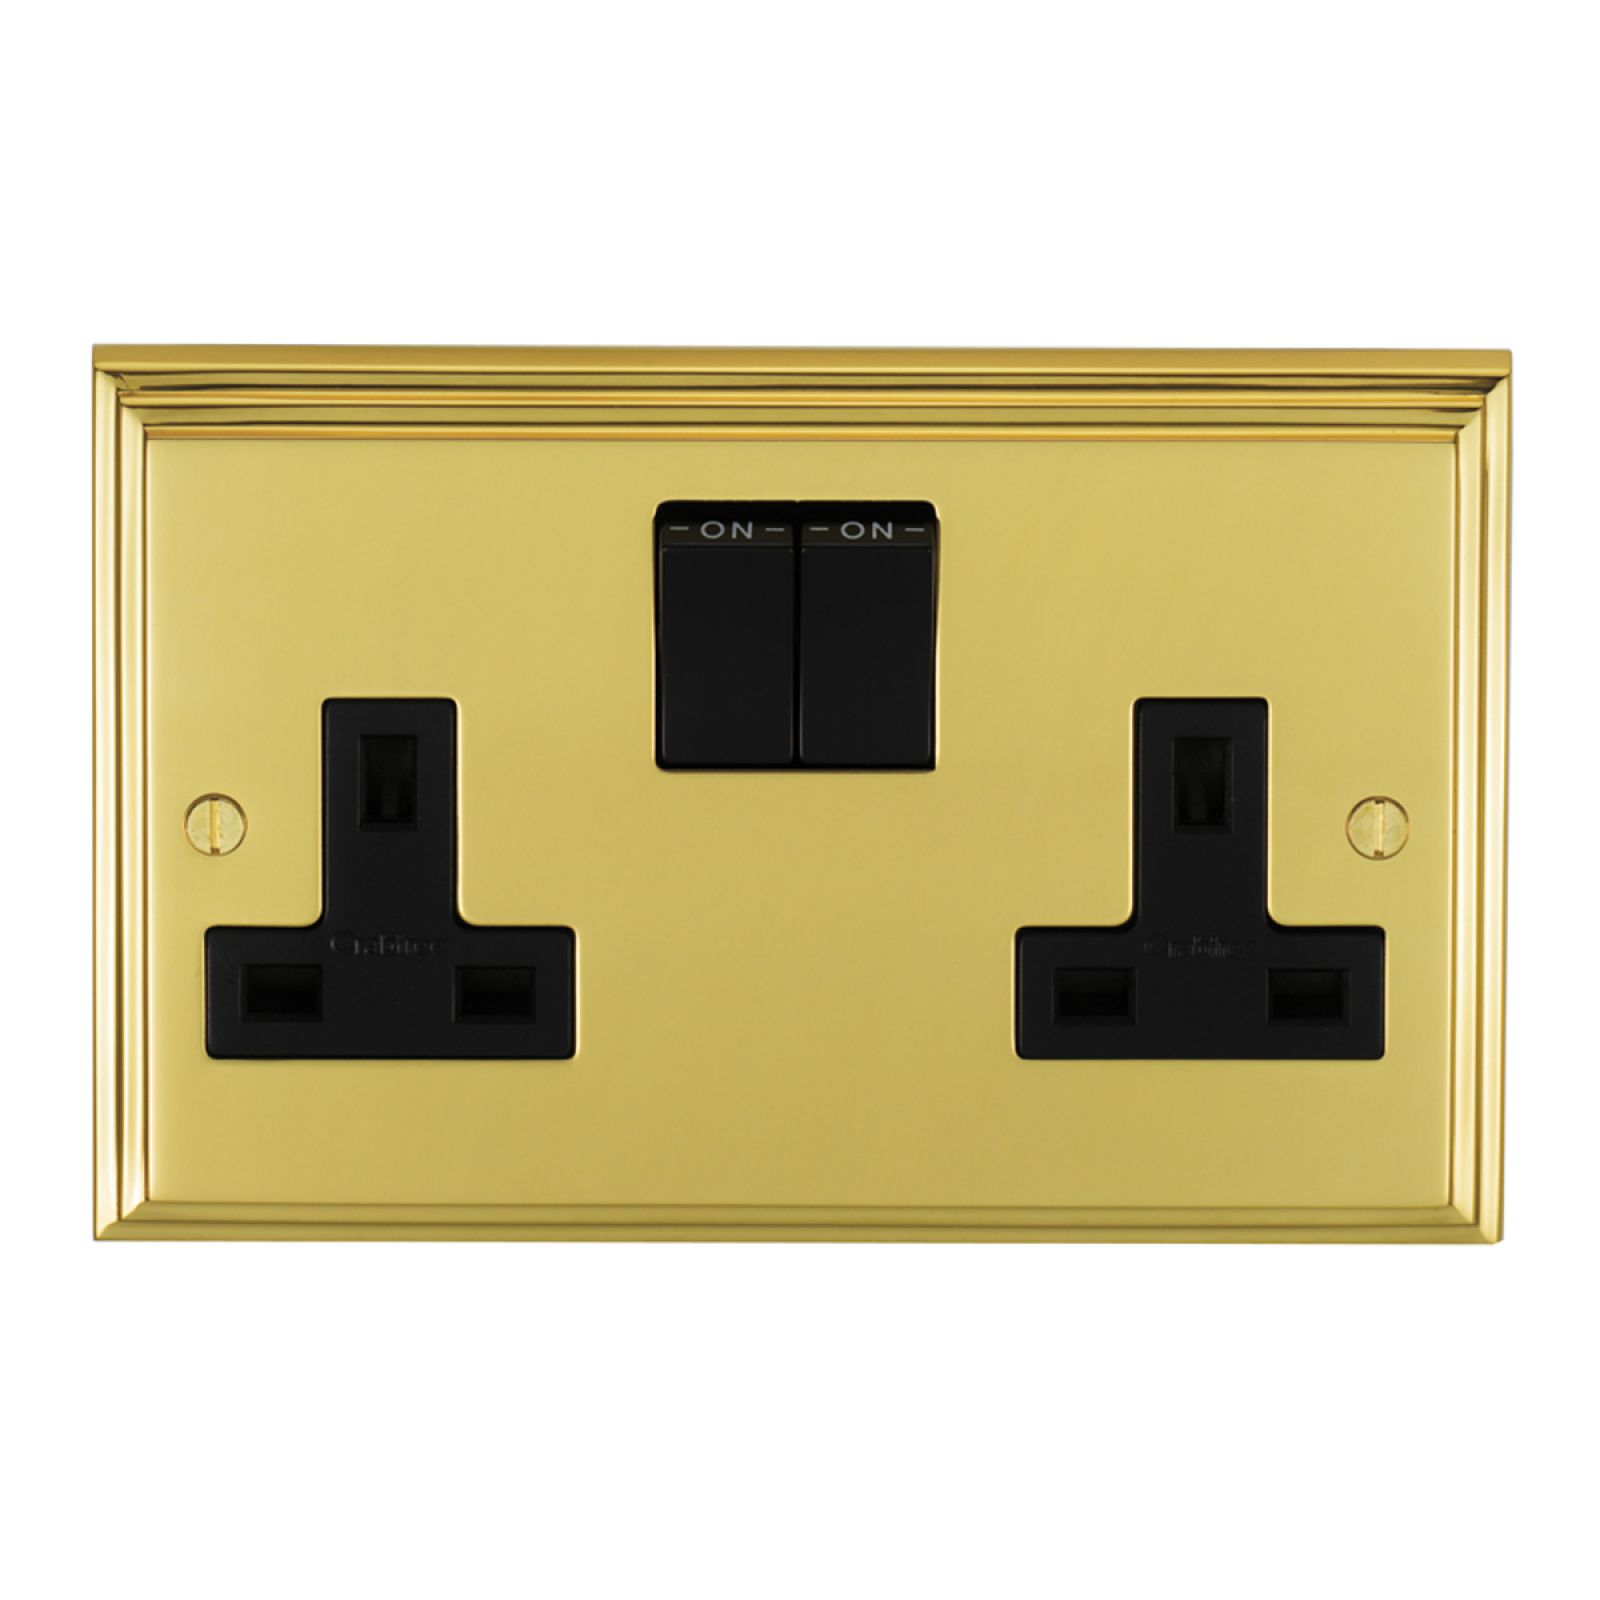 Stepped 2 Gang 13amp DP Switched Socket - brass, chrome or satin chrome